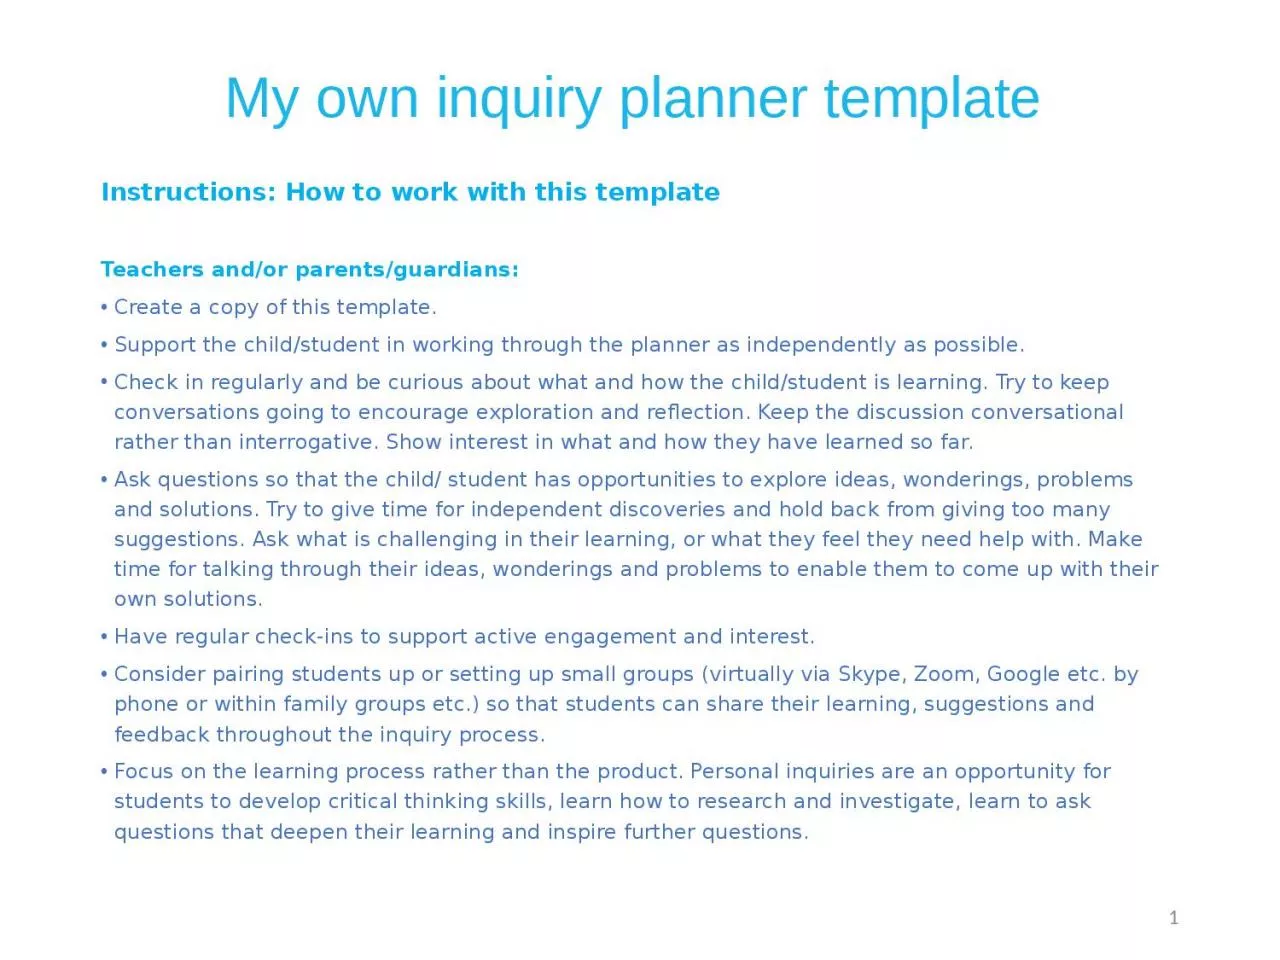 My own inquiry planner template